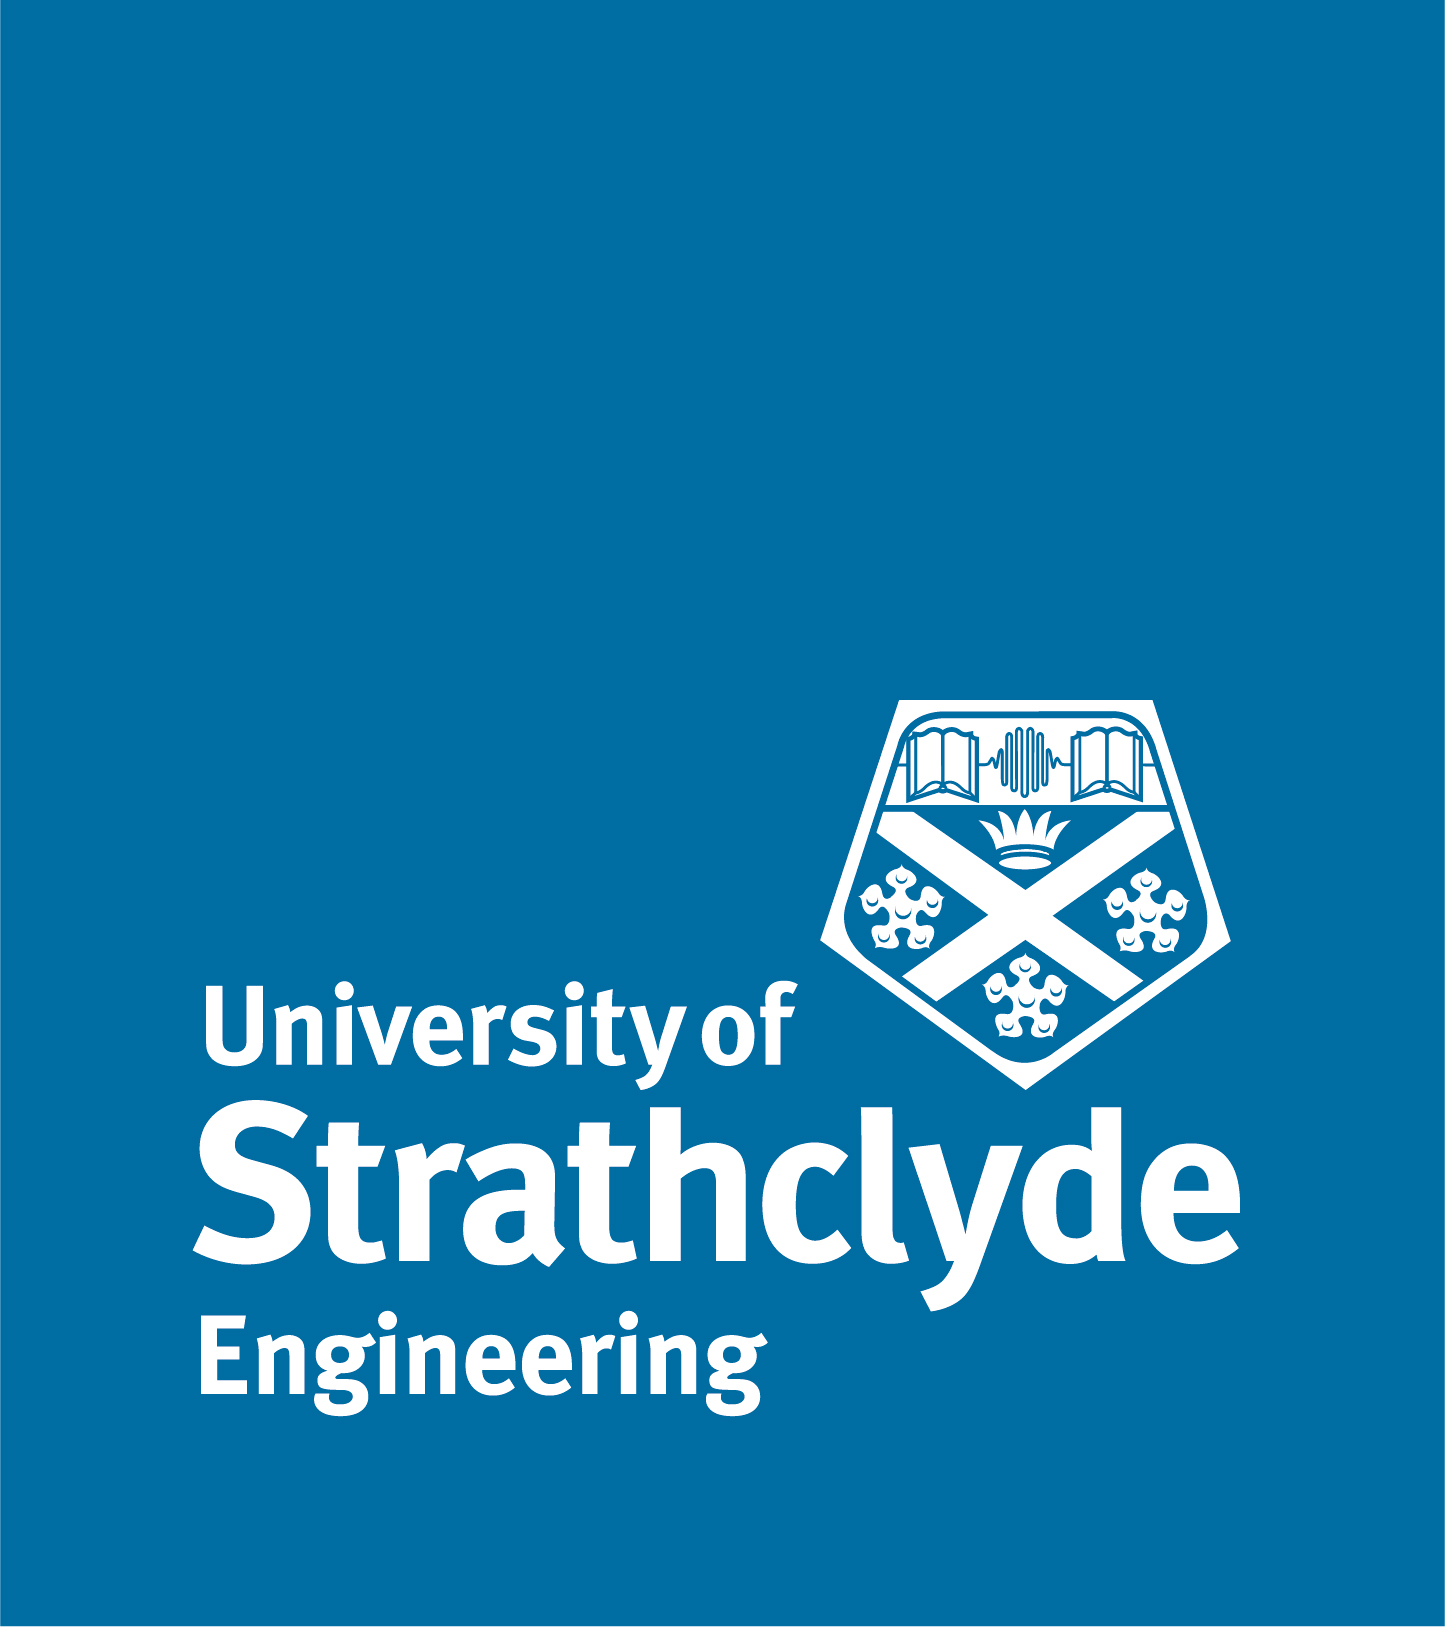 blue background with white uni logo and university of strathclyde engineering written in white text